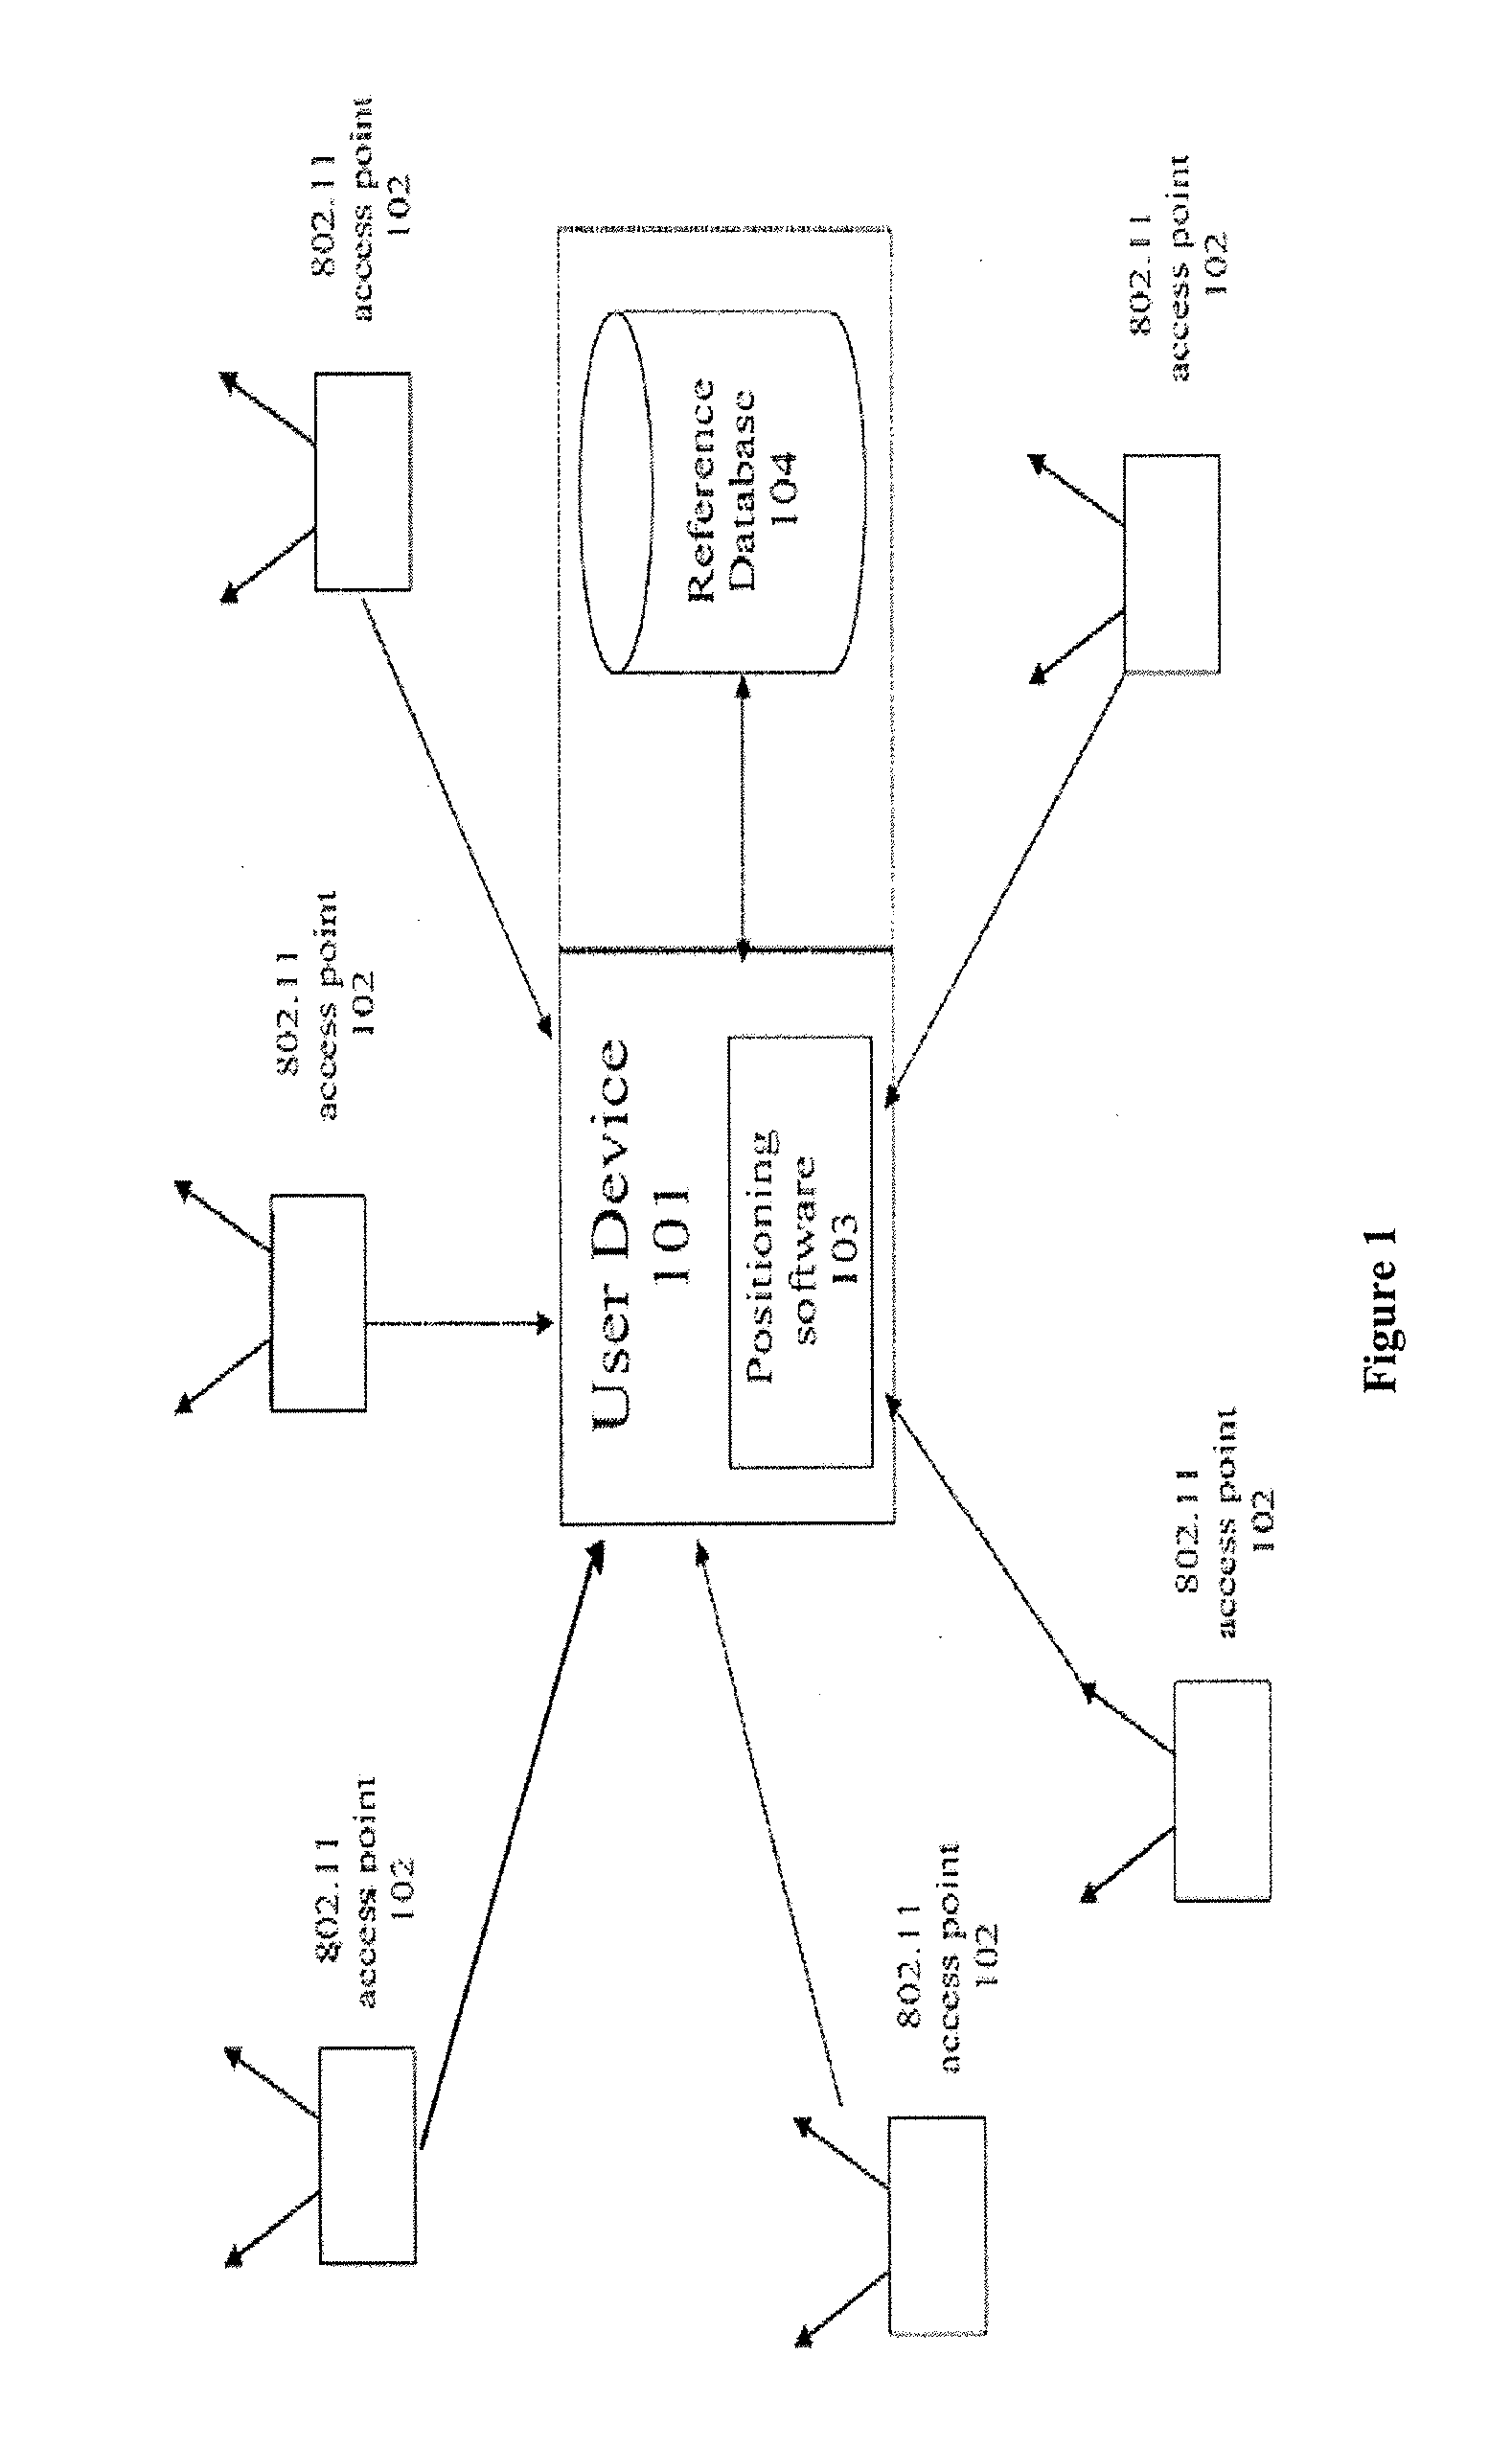 Systems and methods for using a satellite positioning system to detect moved WLAN access points